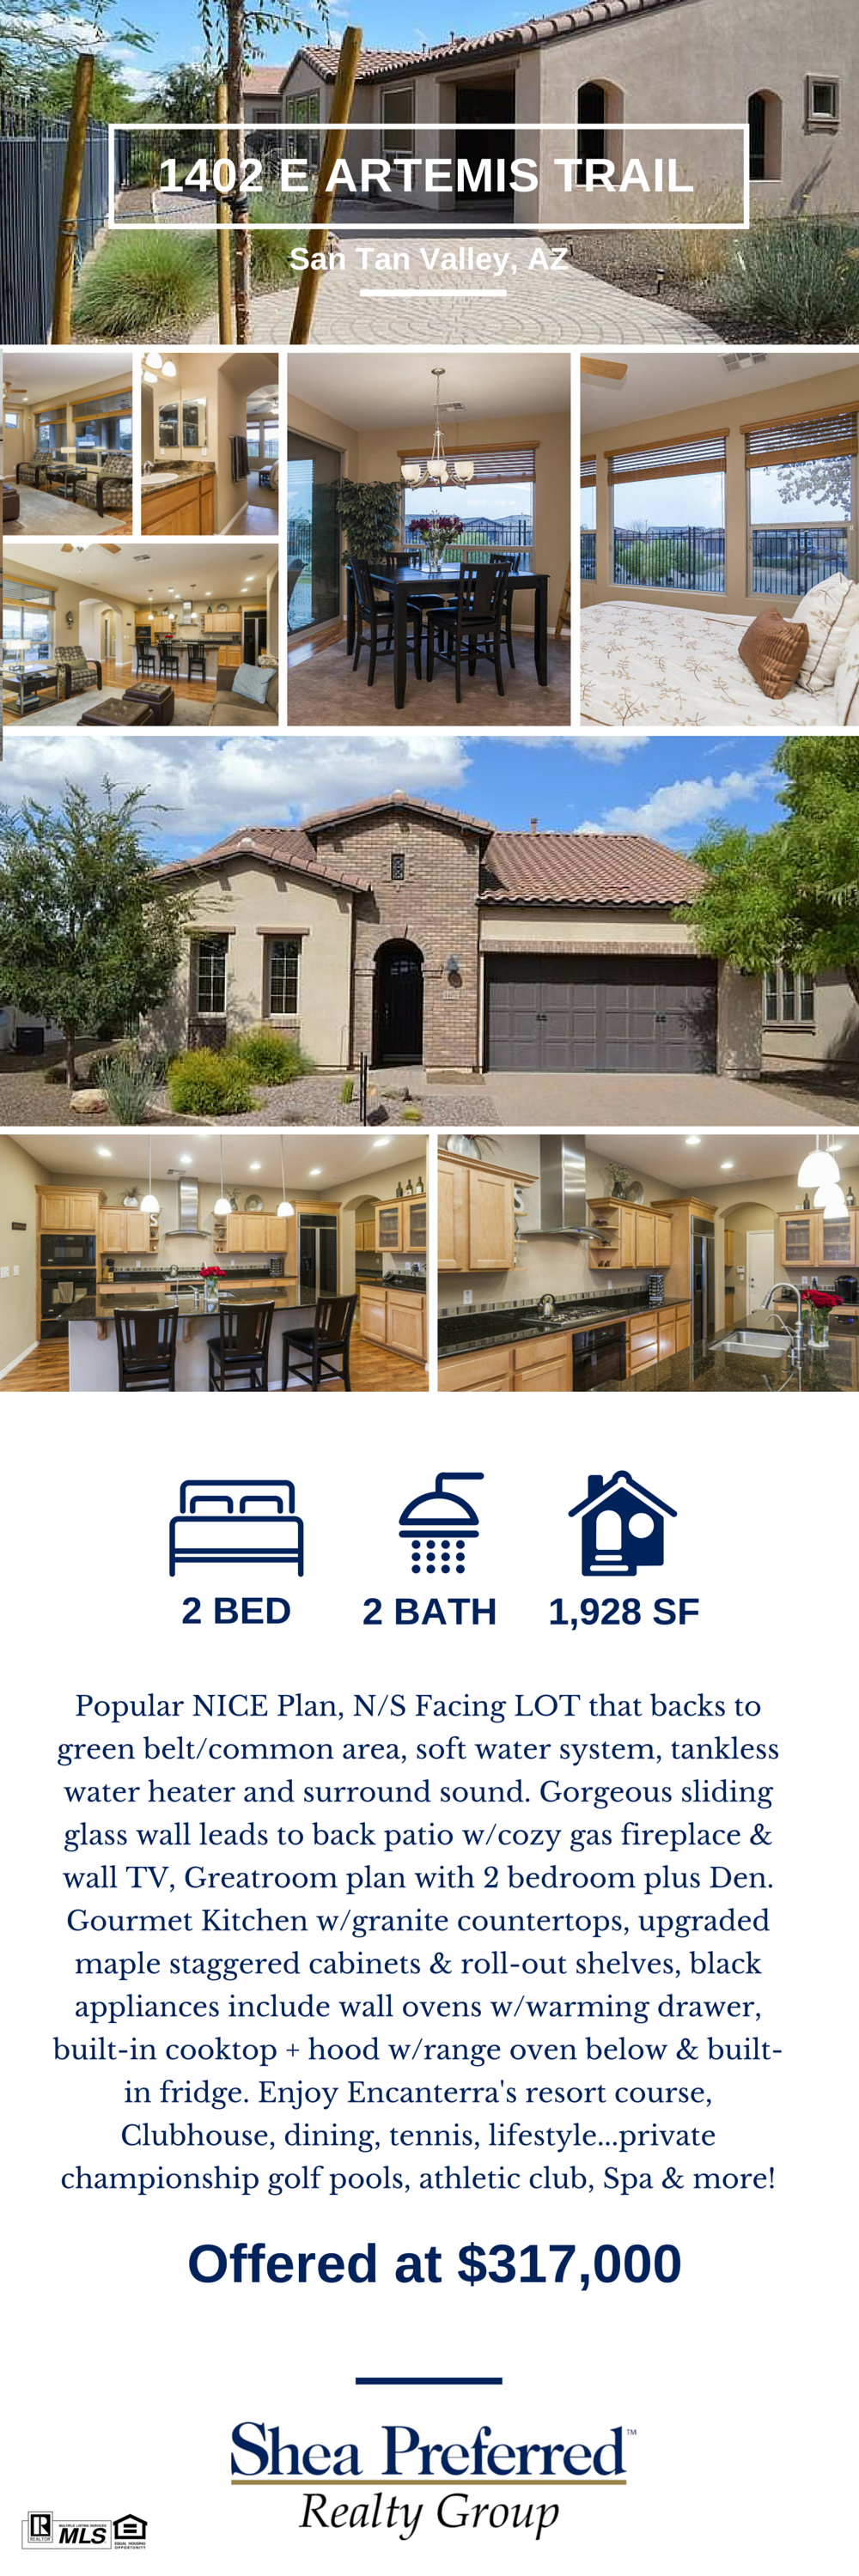 SP Featured Listing blog - 1402 Artemis Trail, San Tan Valley